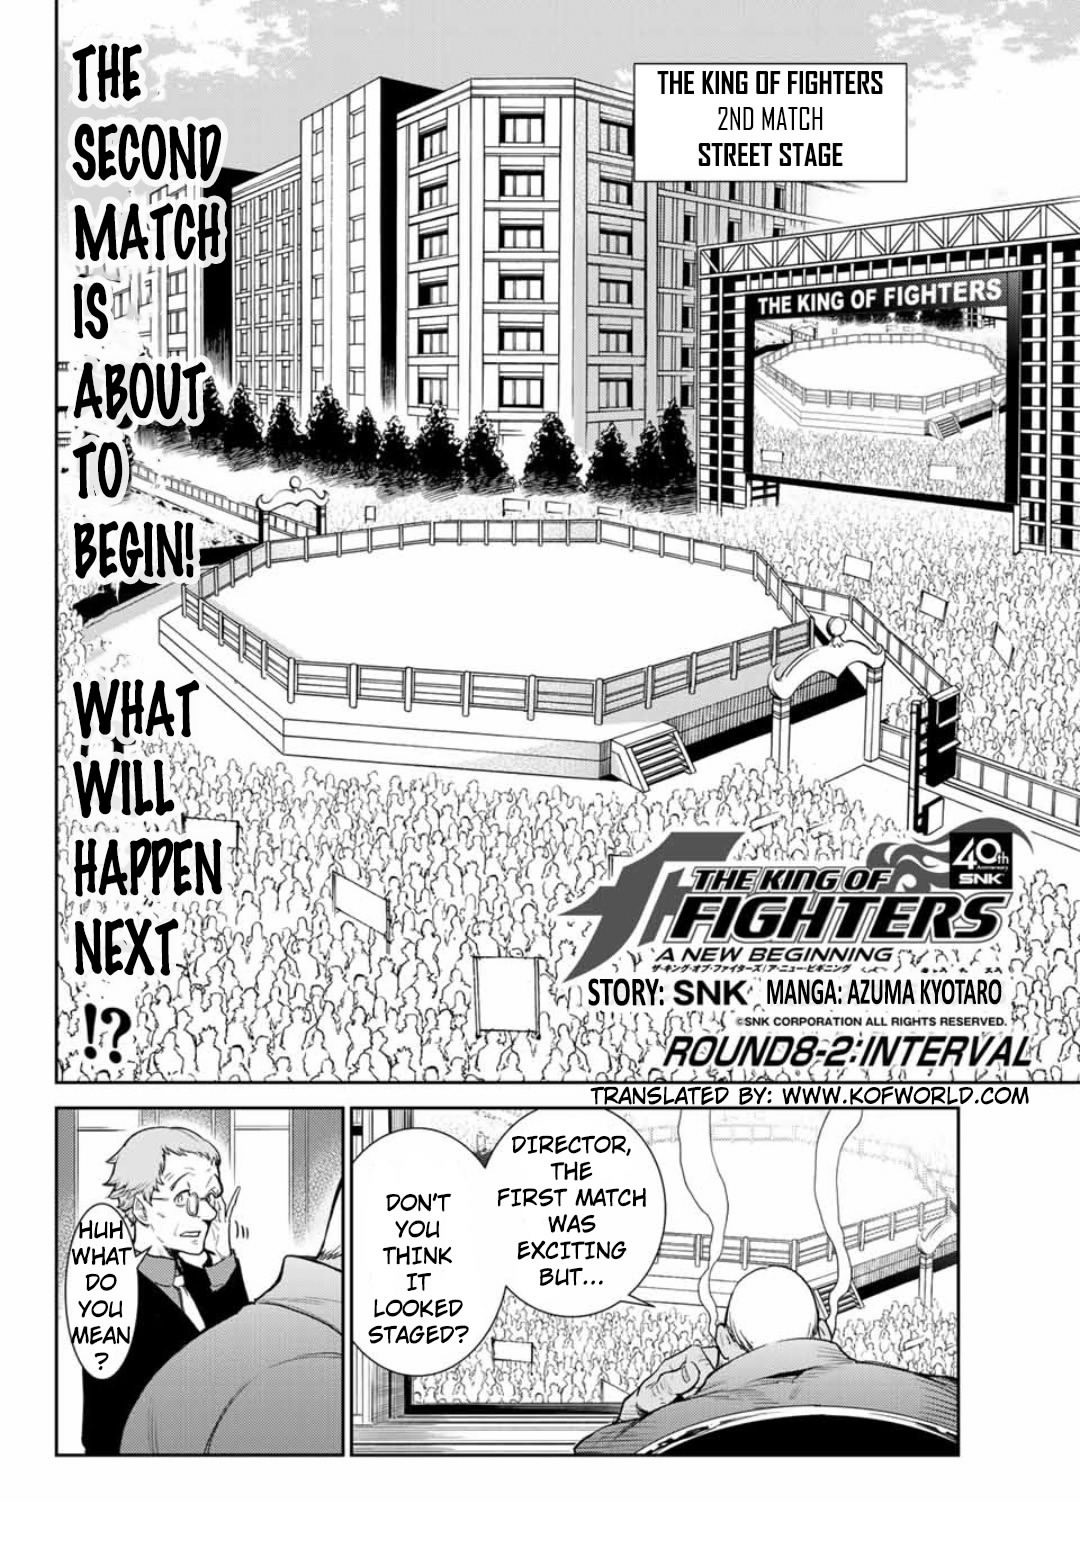 The King of Fighters: A New Beginning Vol. 2 Ch. 8.2 Interval